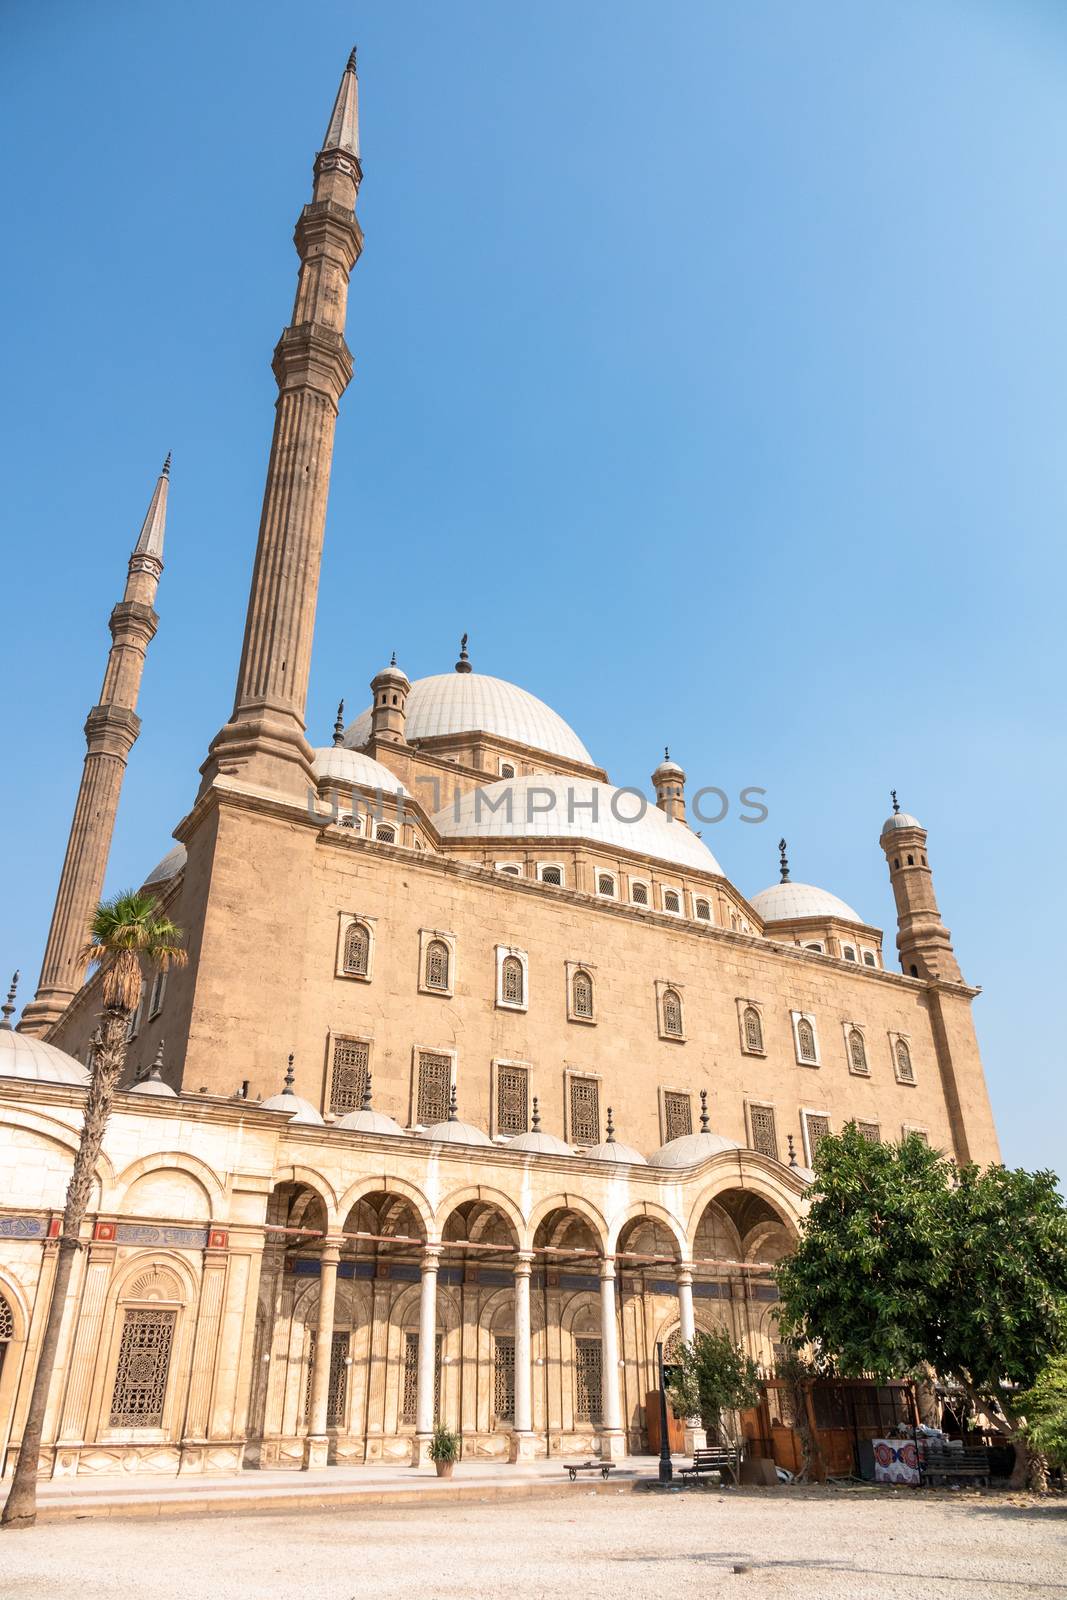 An image of the Mosque of Muhammad Ali in Cairo Egypt at daytime